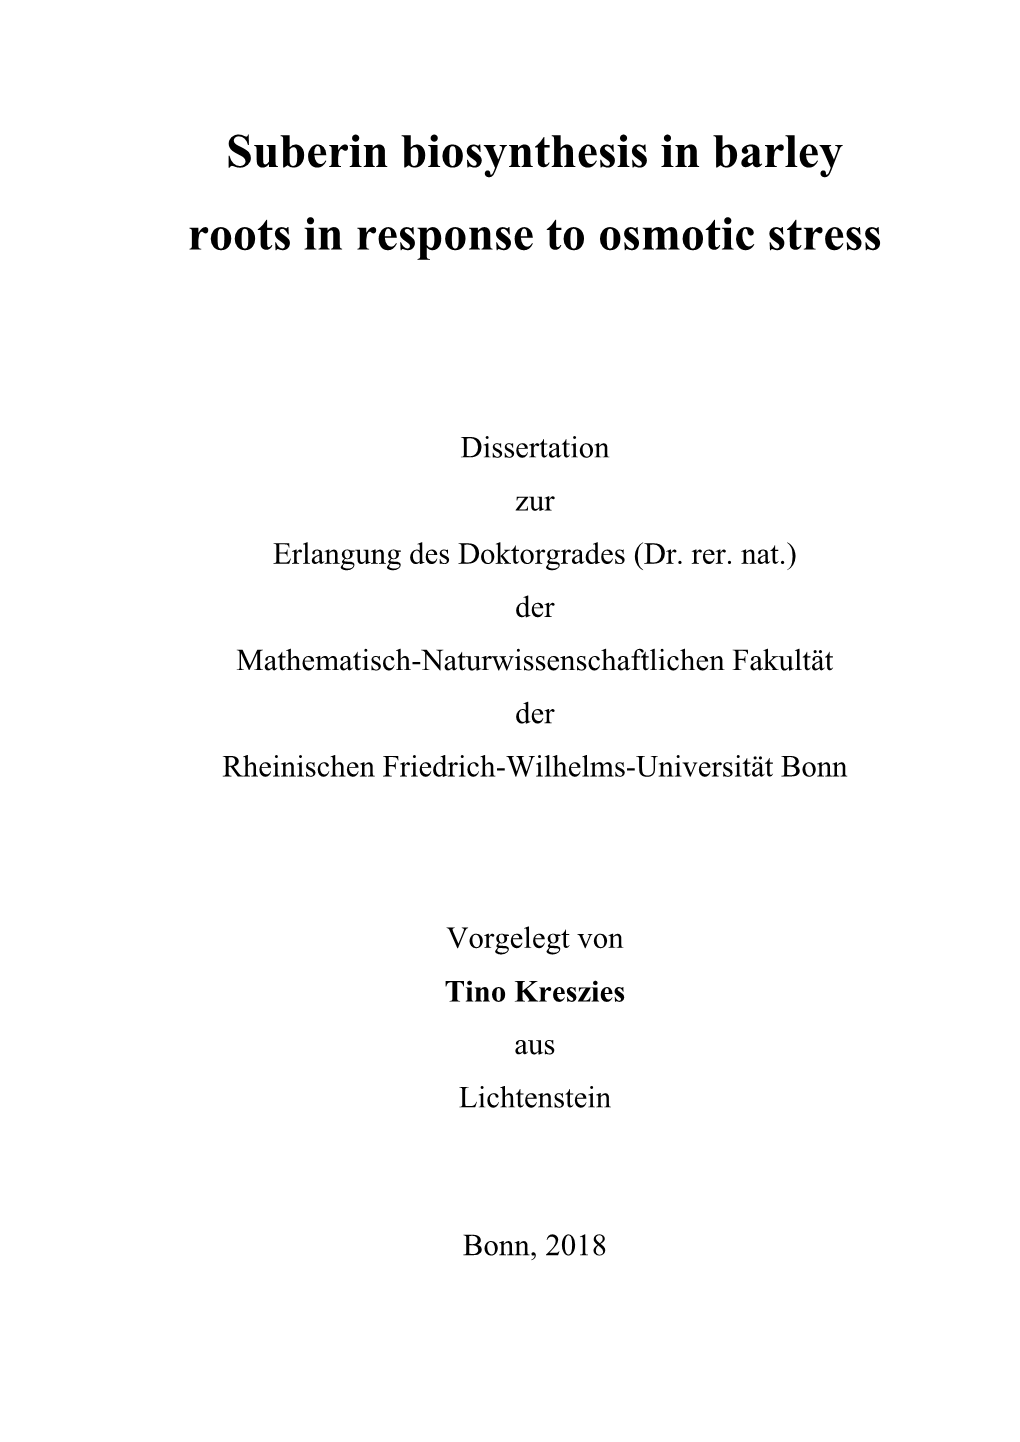 Suberin Biosynthesis in Barley Roots in Response to Osmotic Stress